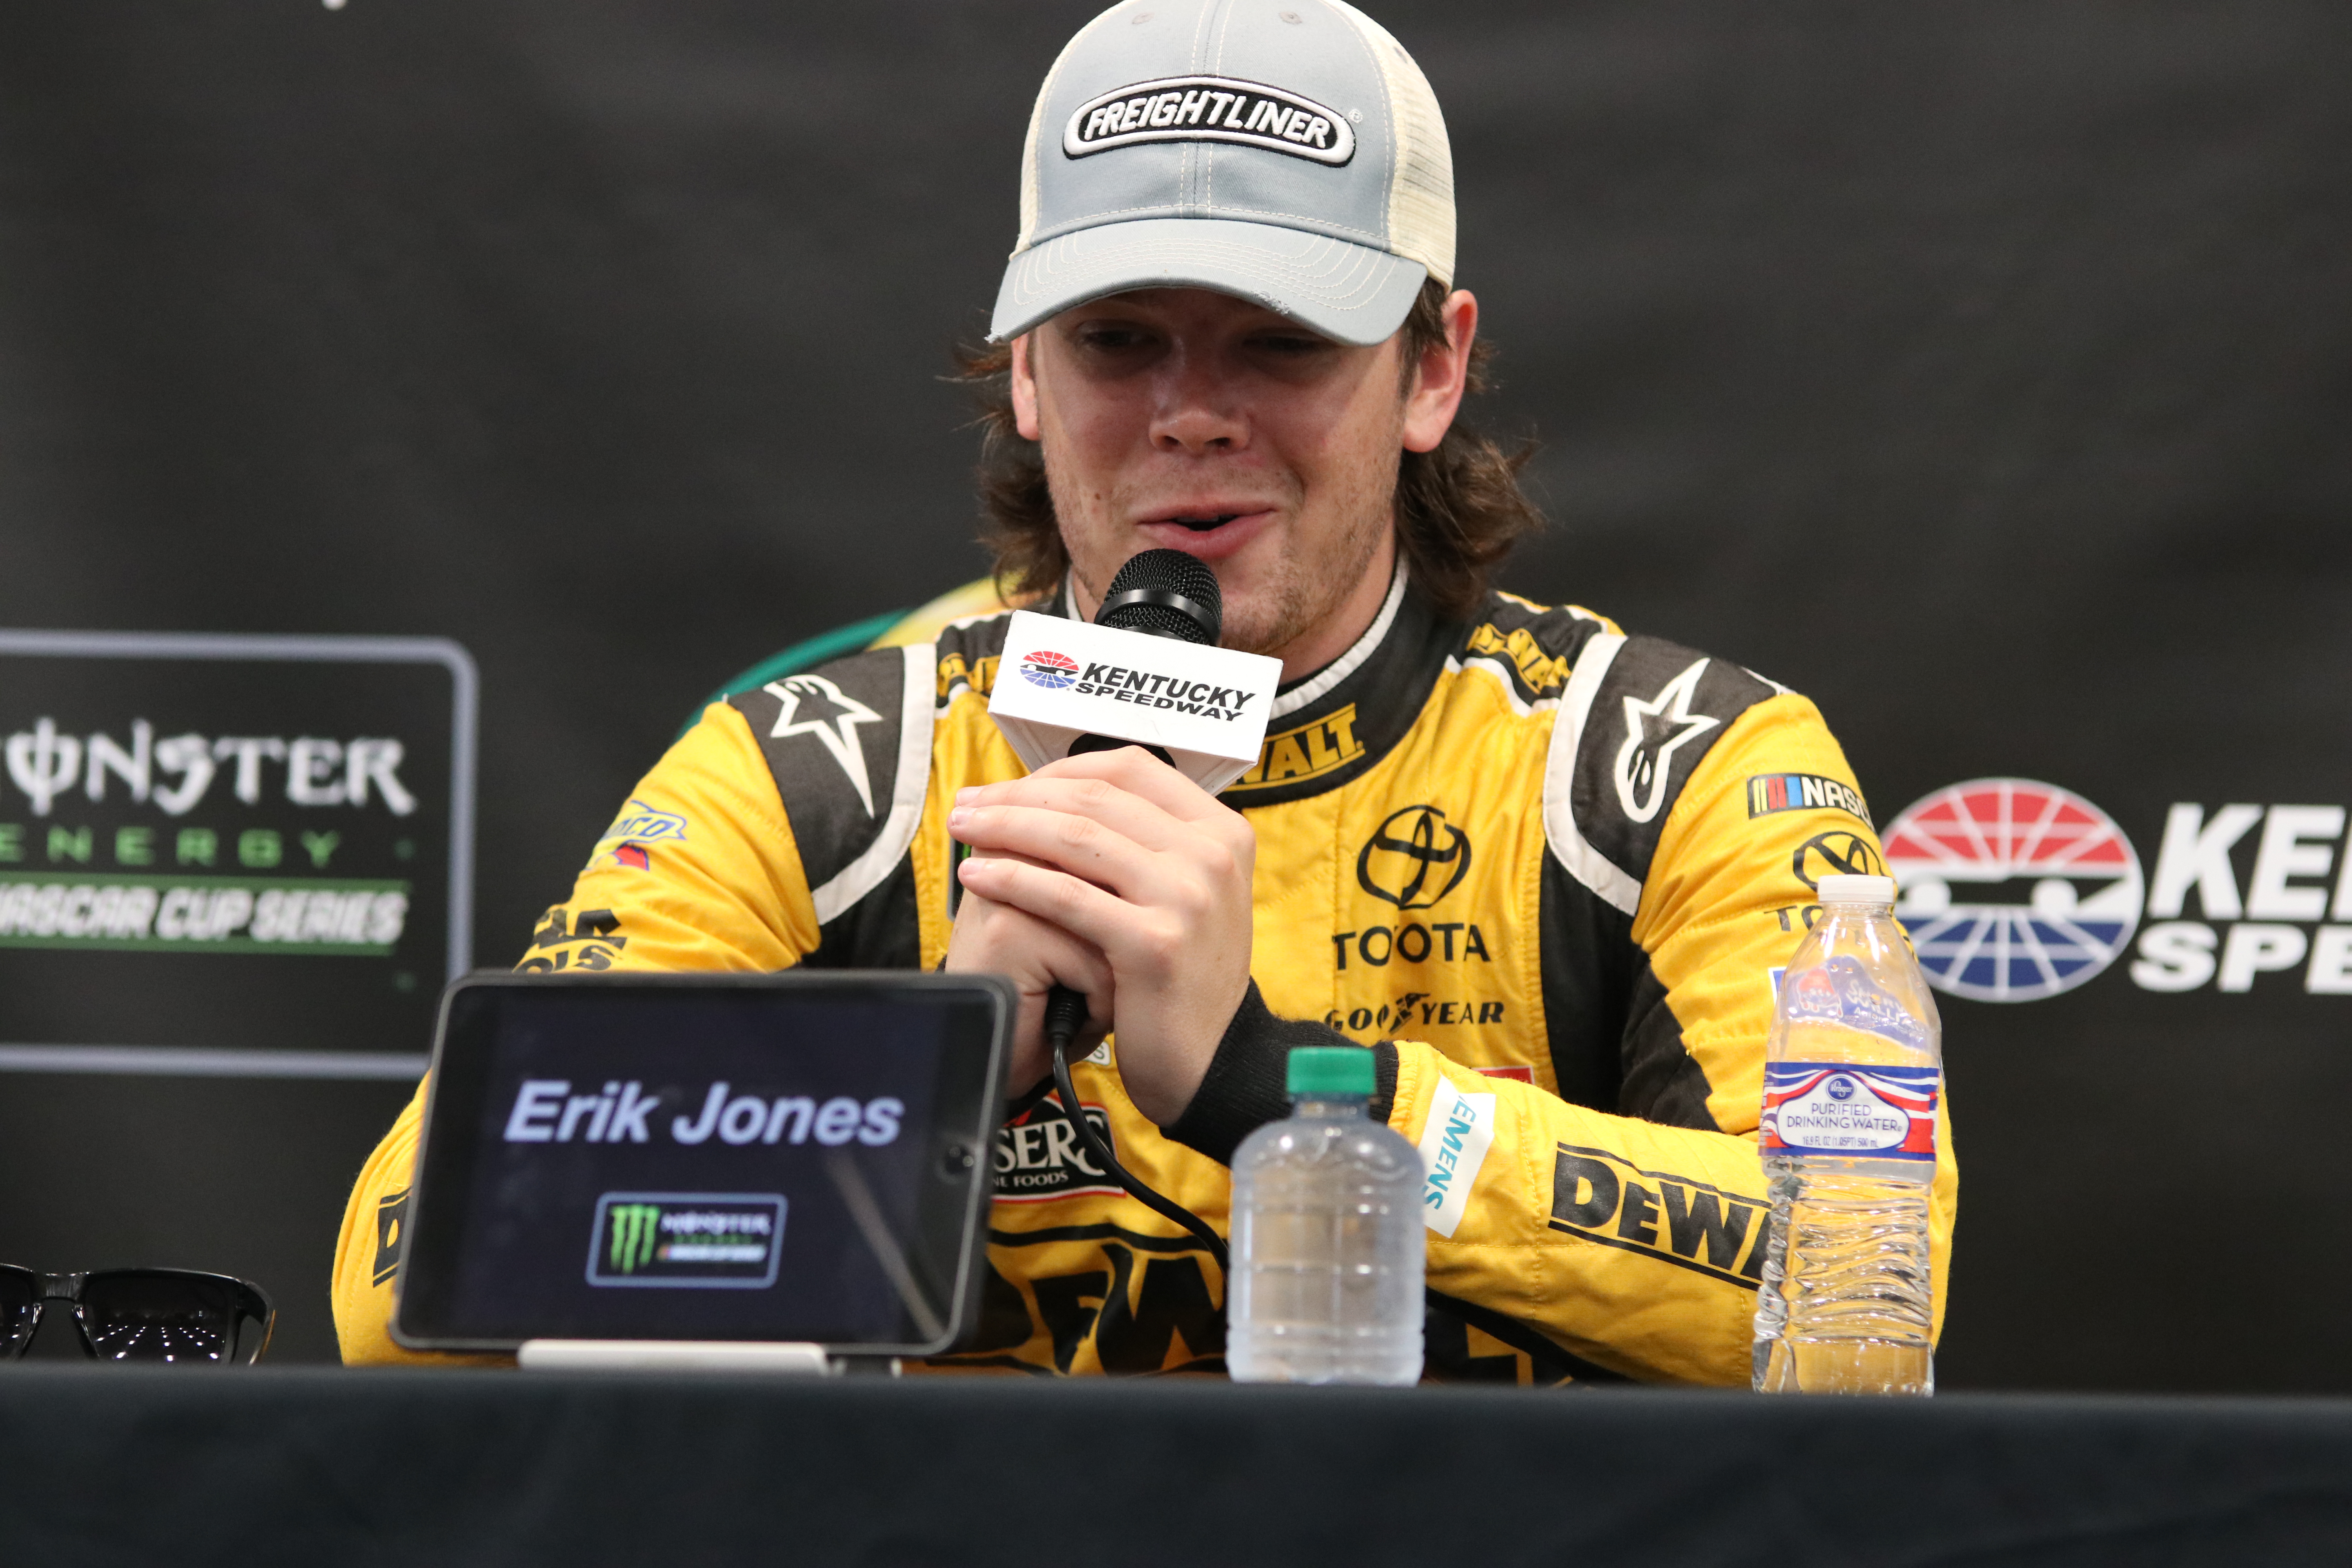 Erik Jones still smiles after his exciting first Cup win last Saturday night at Daytona.